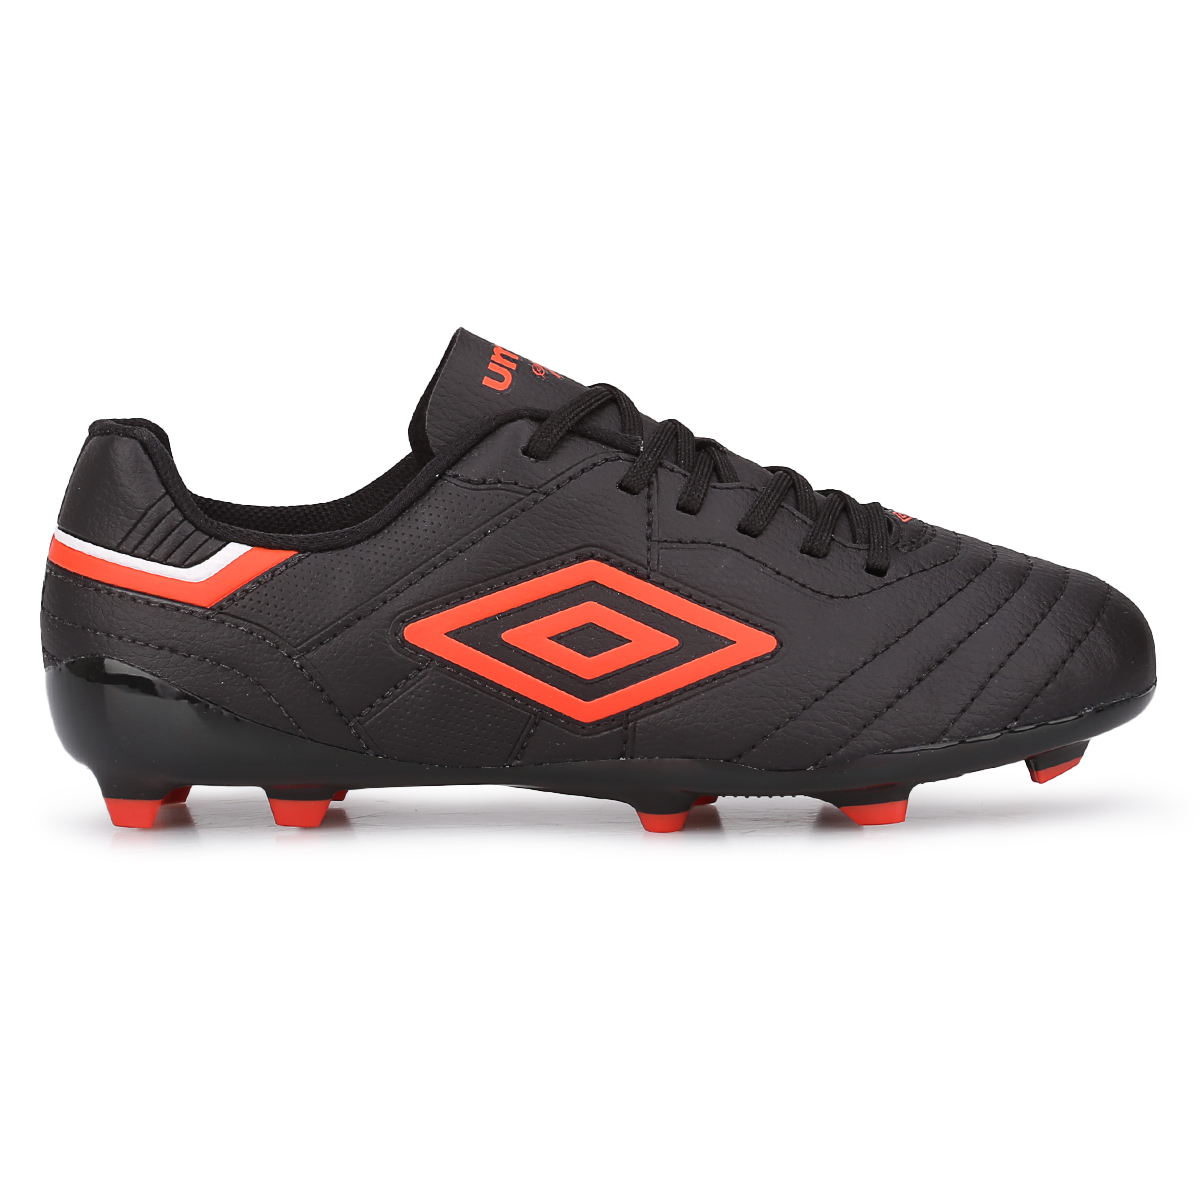 Botines Umbro Campo Speciali Iii League,  image number null